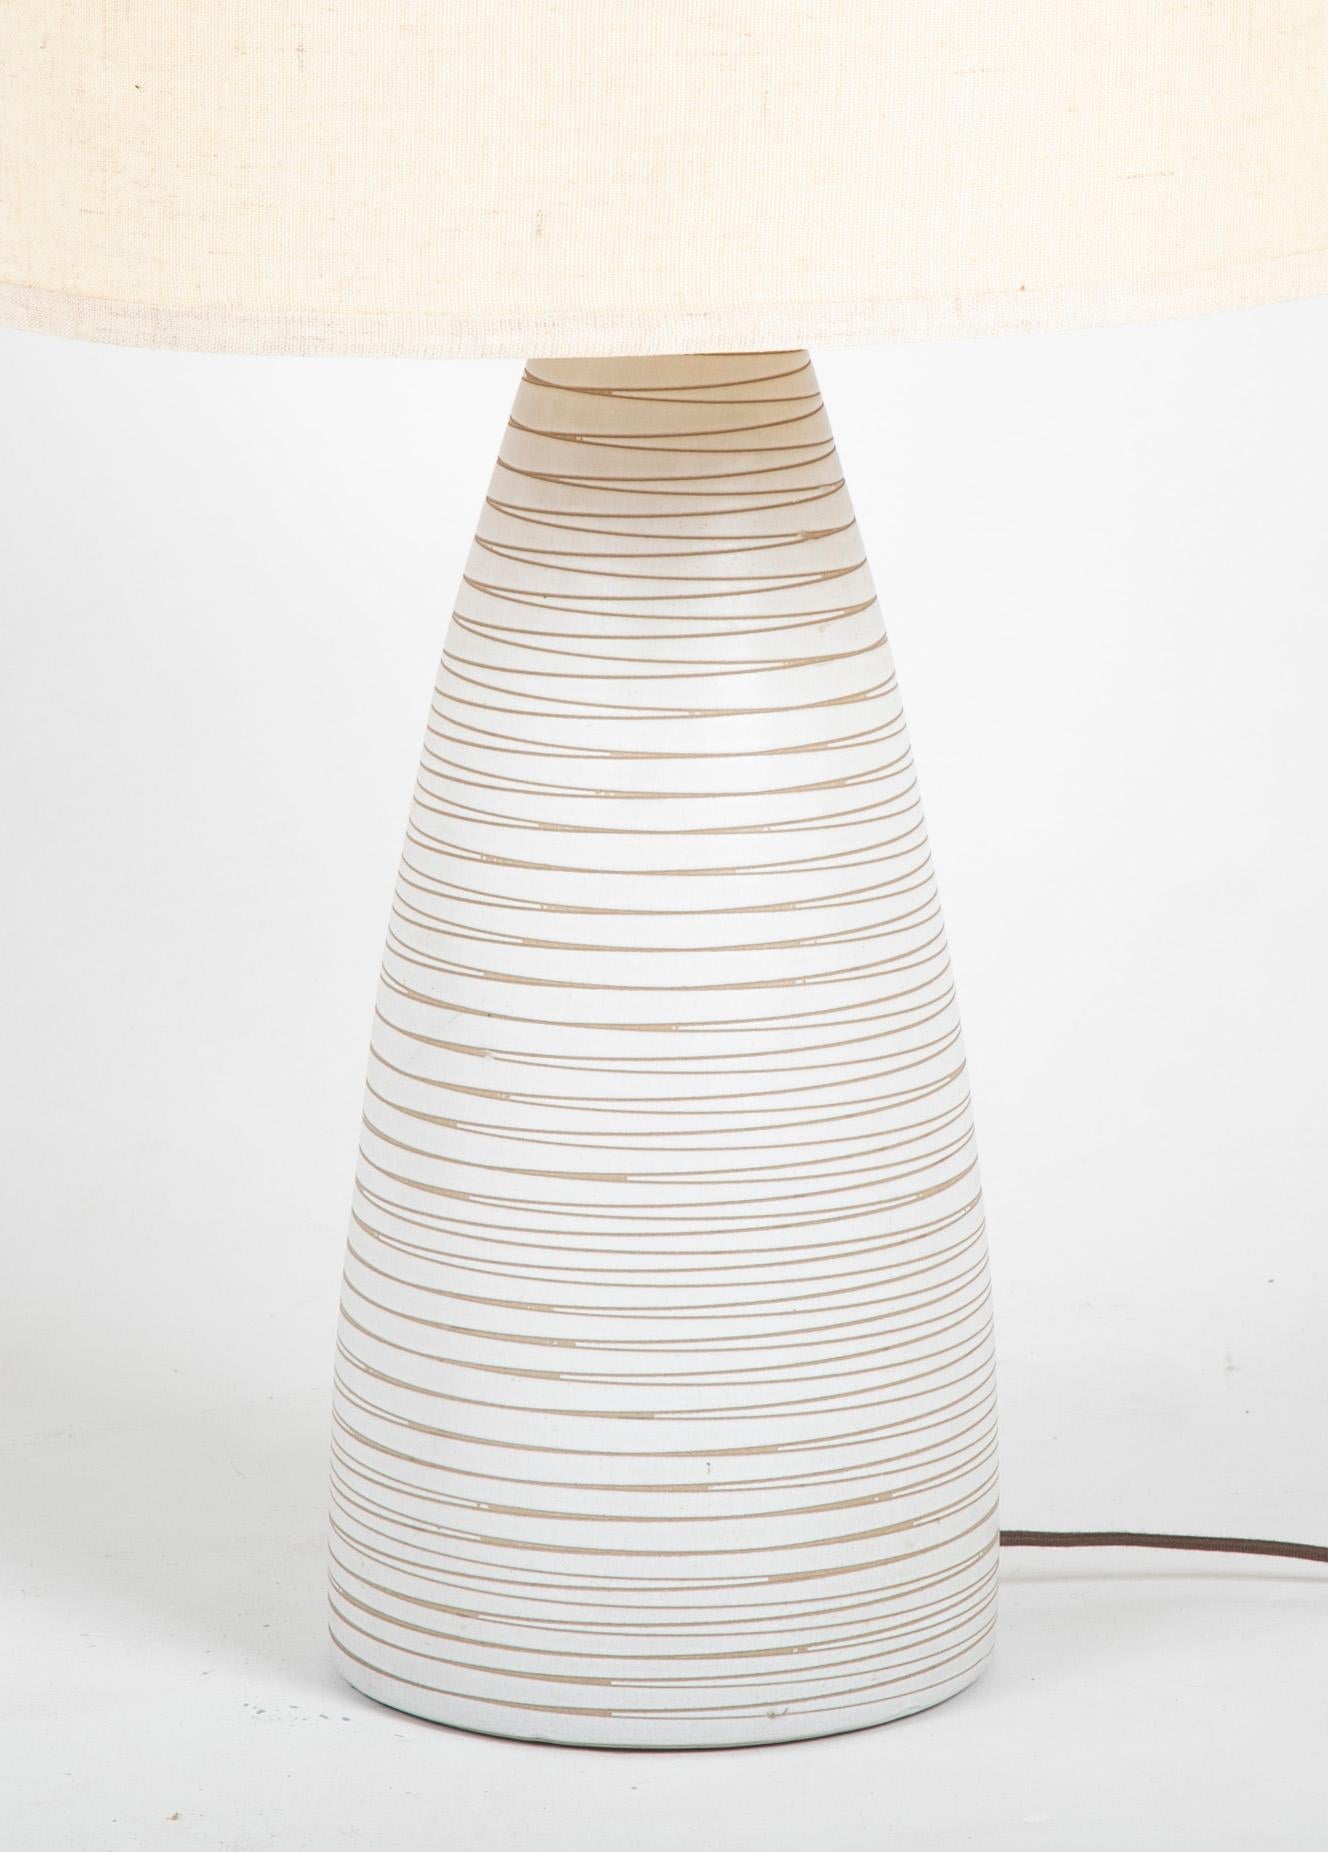 A singed Martz white glazed earthenware lamp with walnut mounts. Now with new shade.
Martz lamps were made by  

Gordon Martz (1924-2015) & Jane Marshall Martz (1929-2007) for Marshall Studios in Veedersburg, Indiana, in 1960s.

       